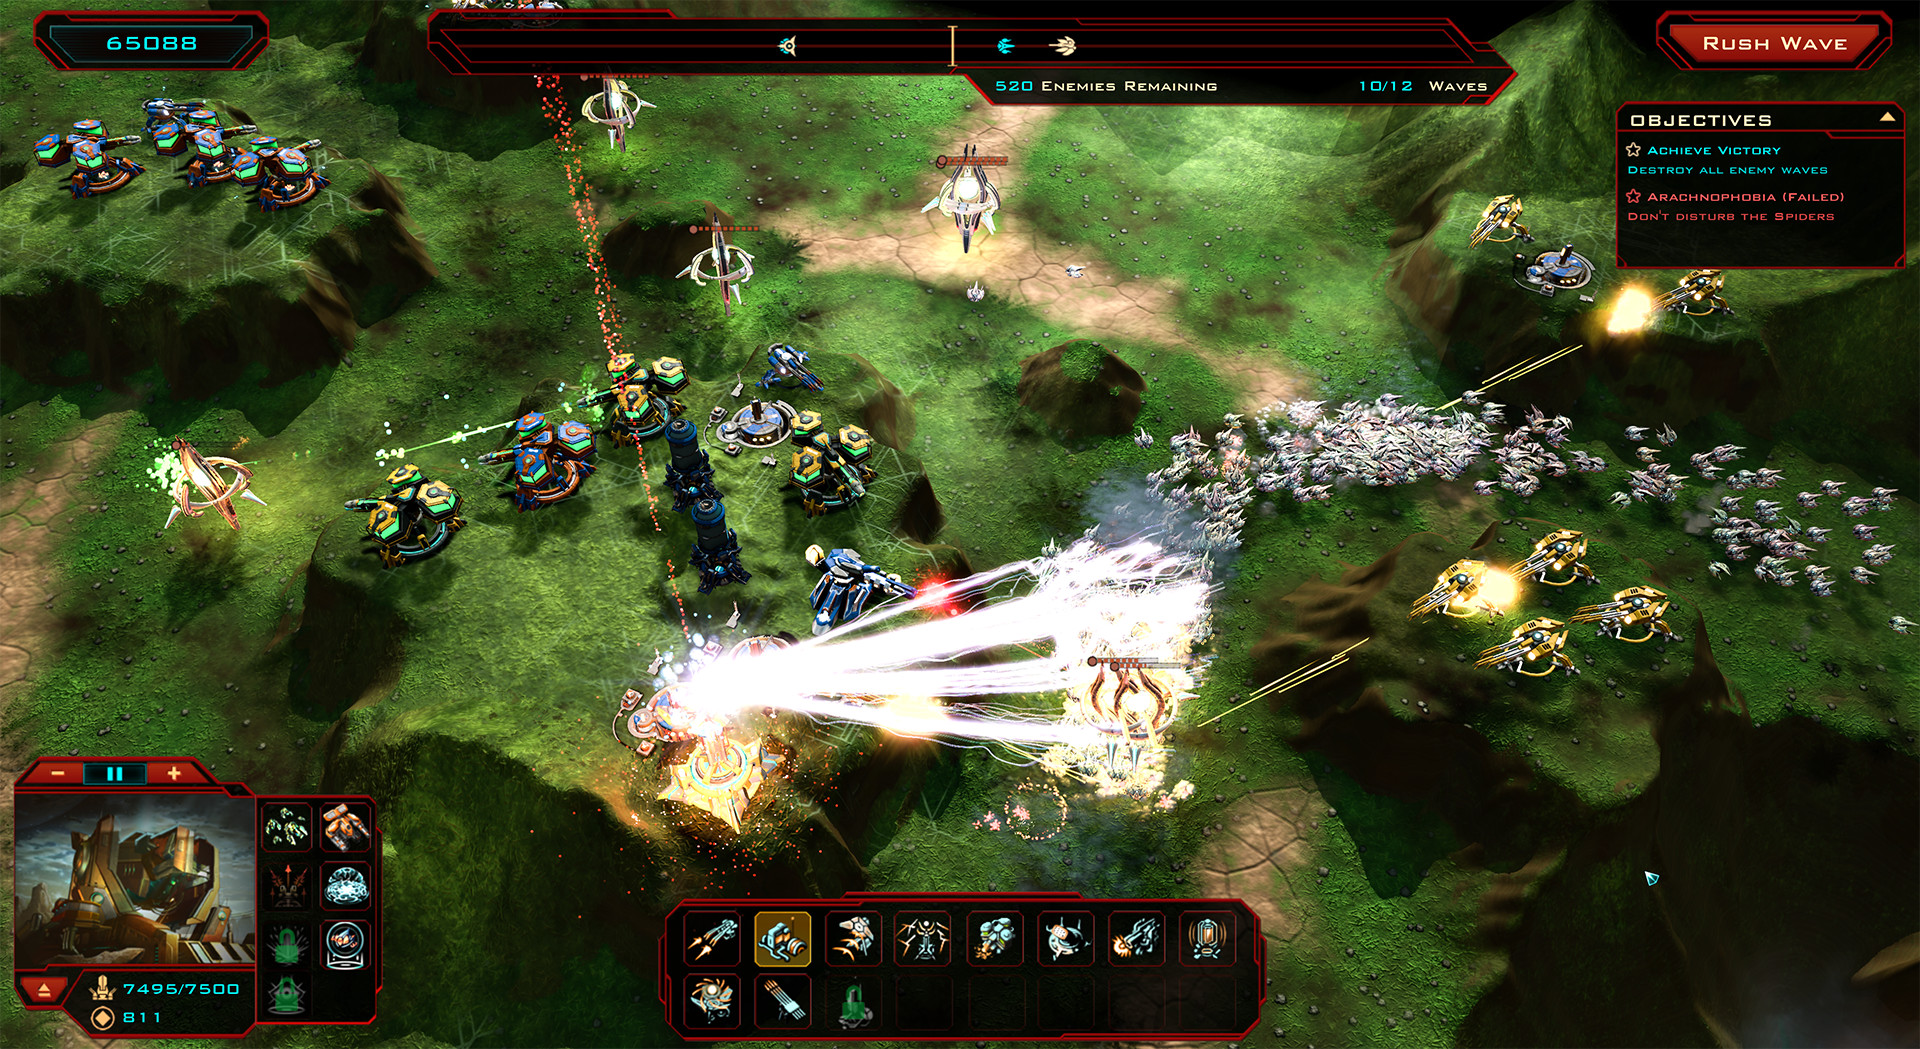 Siege of Centauri Launches via Early Access on April 16